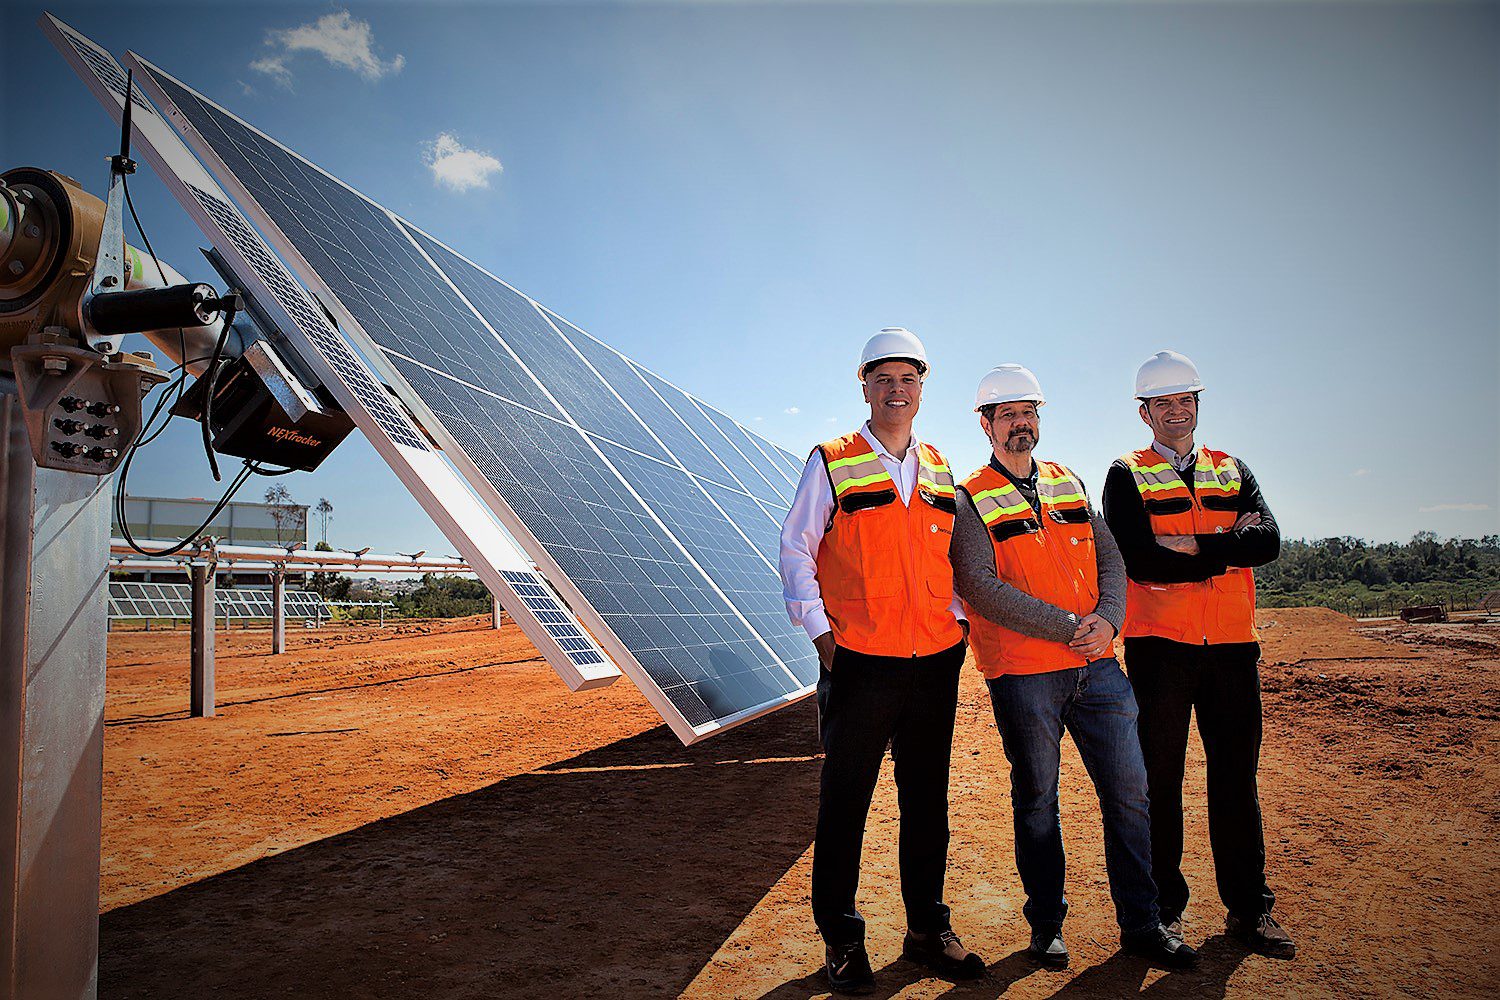 Solar research, test lab and training facility builds on Nextracker’s 5.5 gigawatts of smart solar trackers in Brazil and 70 gigawatts worldwide